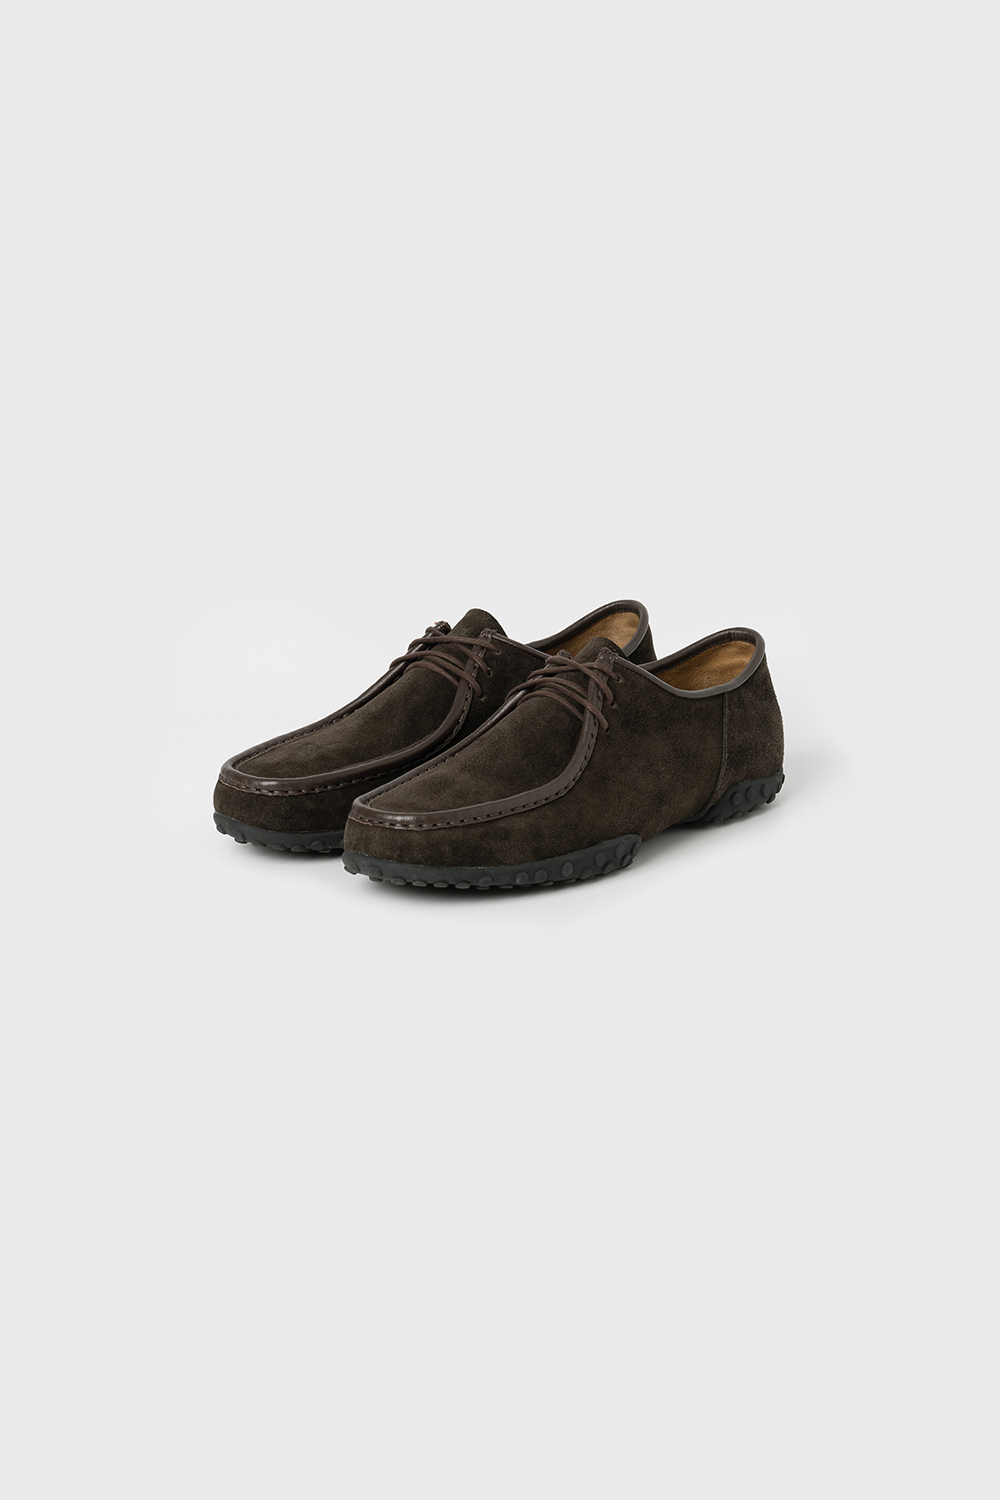 MOC DRIVING SHOES (BROWN)